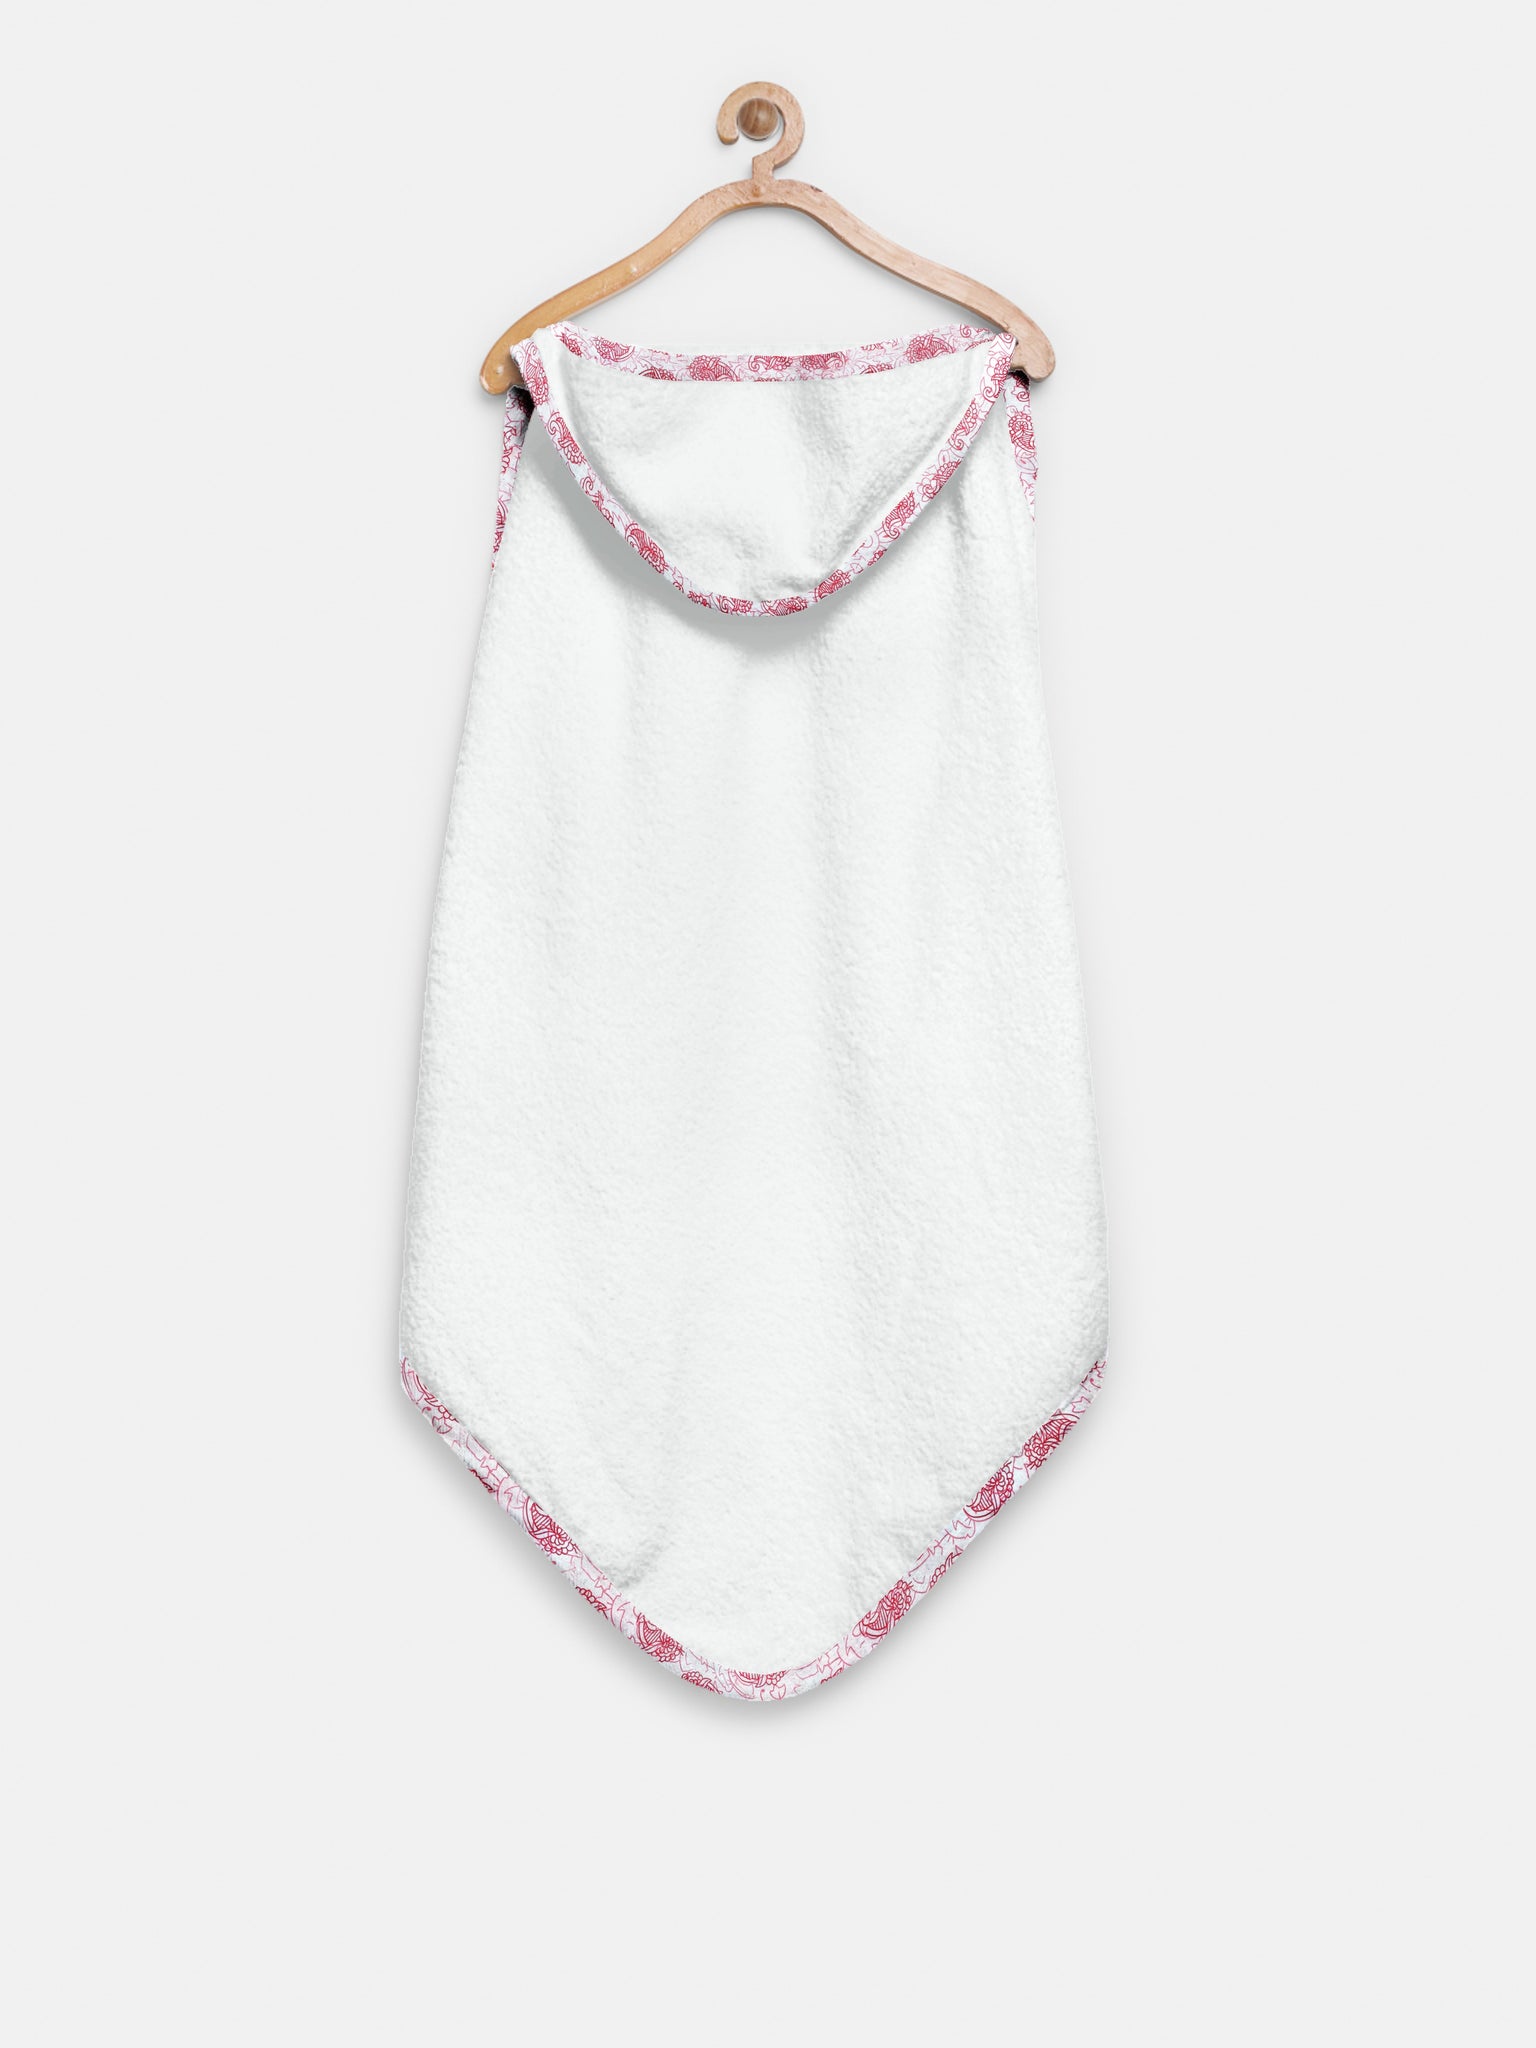 ‘Red Floral’ Organic Hooded Towel Set